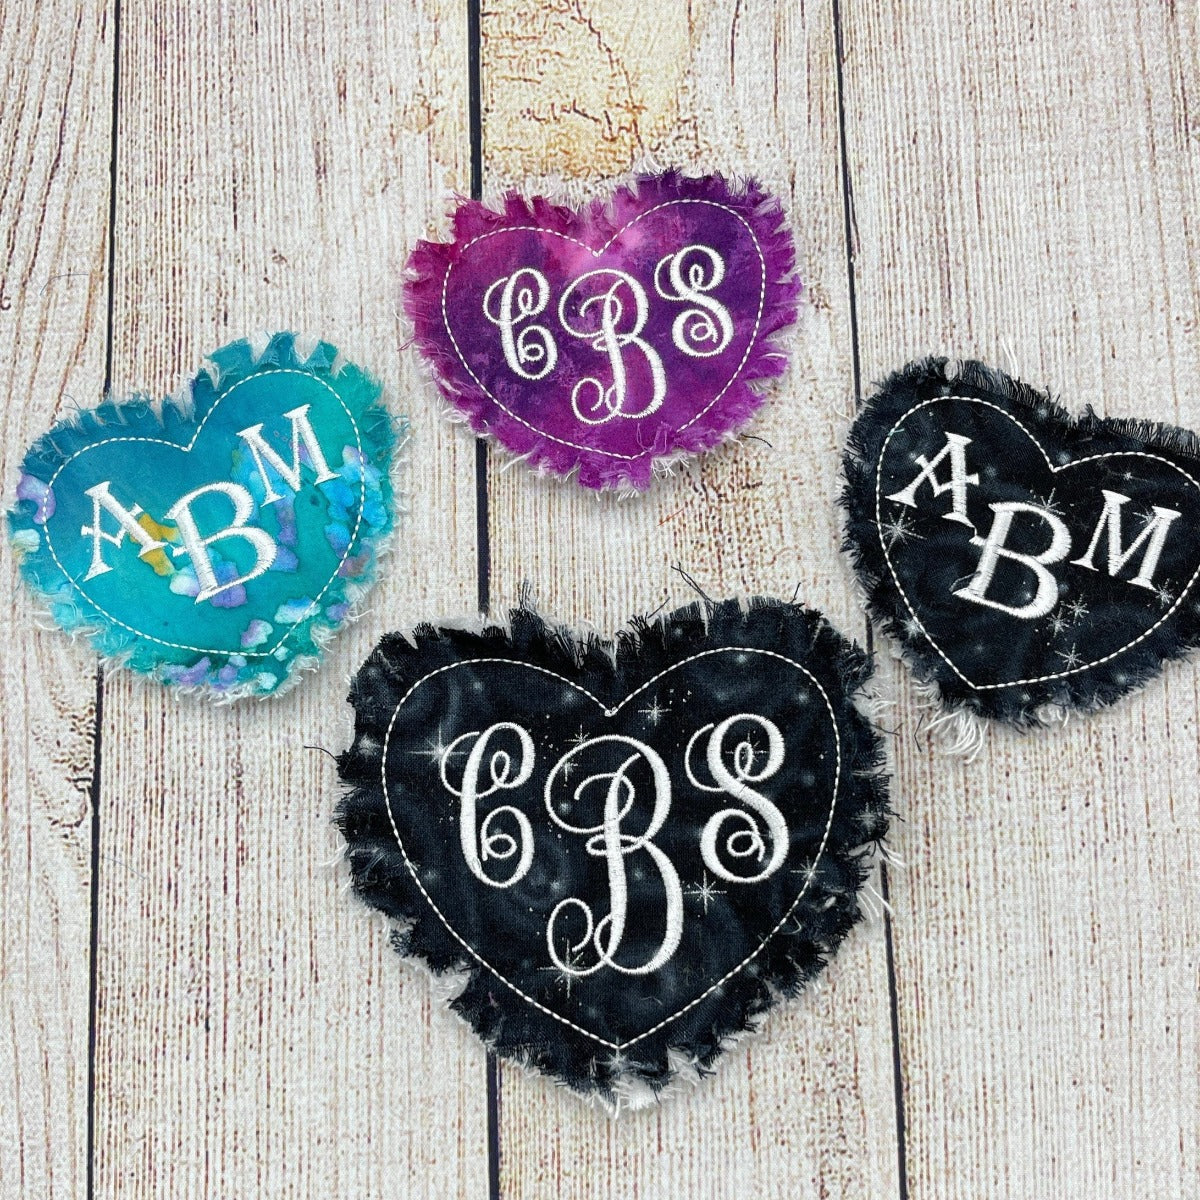 Heart shaped monogram raggy patches